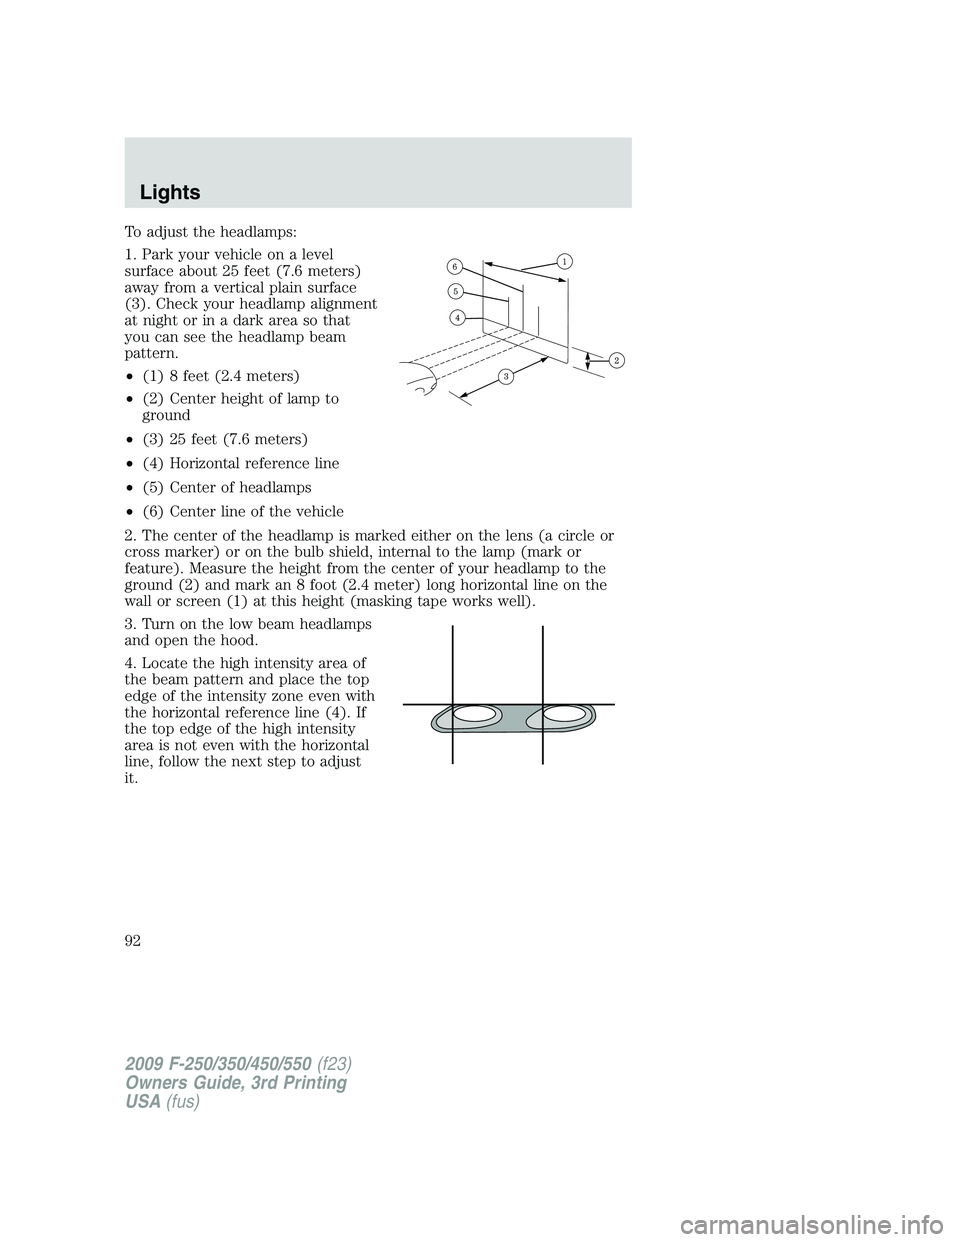 FORD F250 2009  Owners Manual To adjust the headlamps:
1. Park your vehicle on a level
surface about 25 feet (7.6 meters)
away from a vertical plain surface
(3). Check your headlamp alignment
at night or in a dark area so that
you